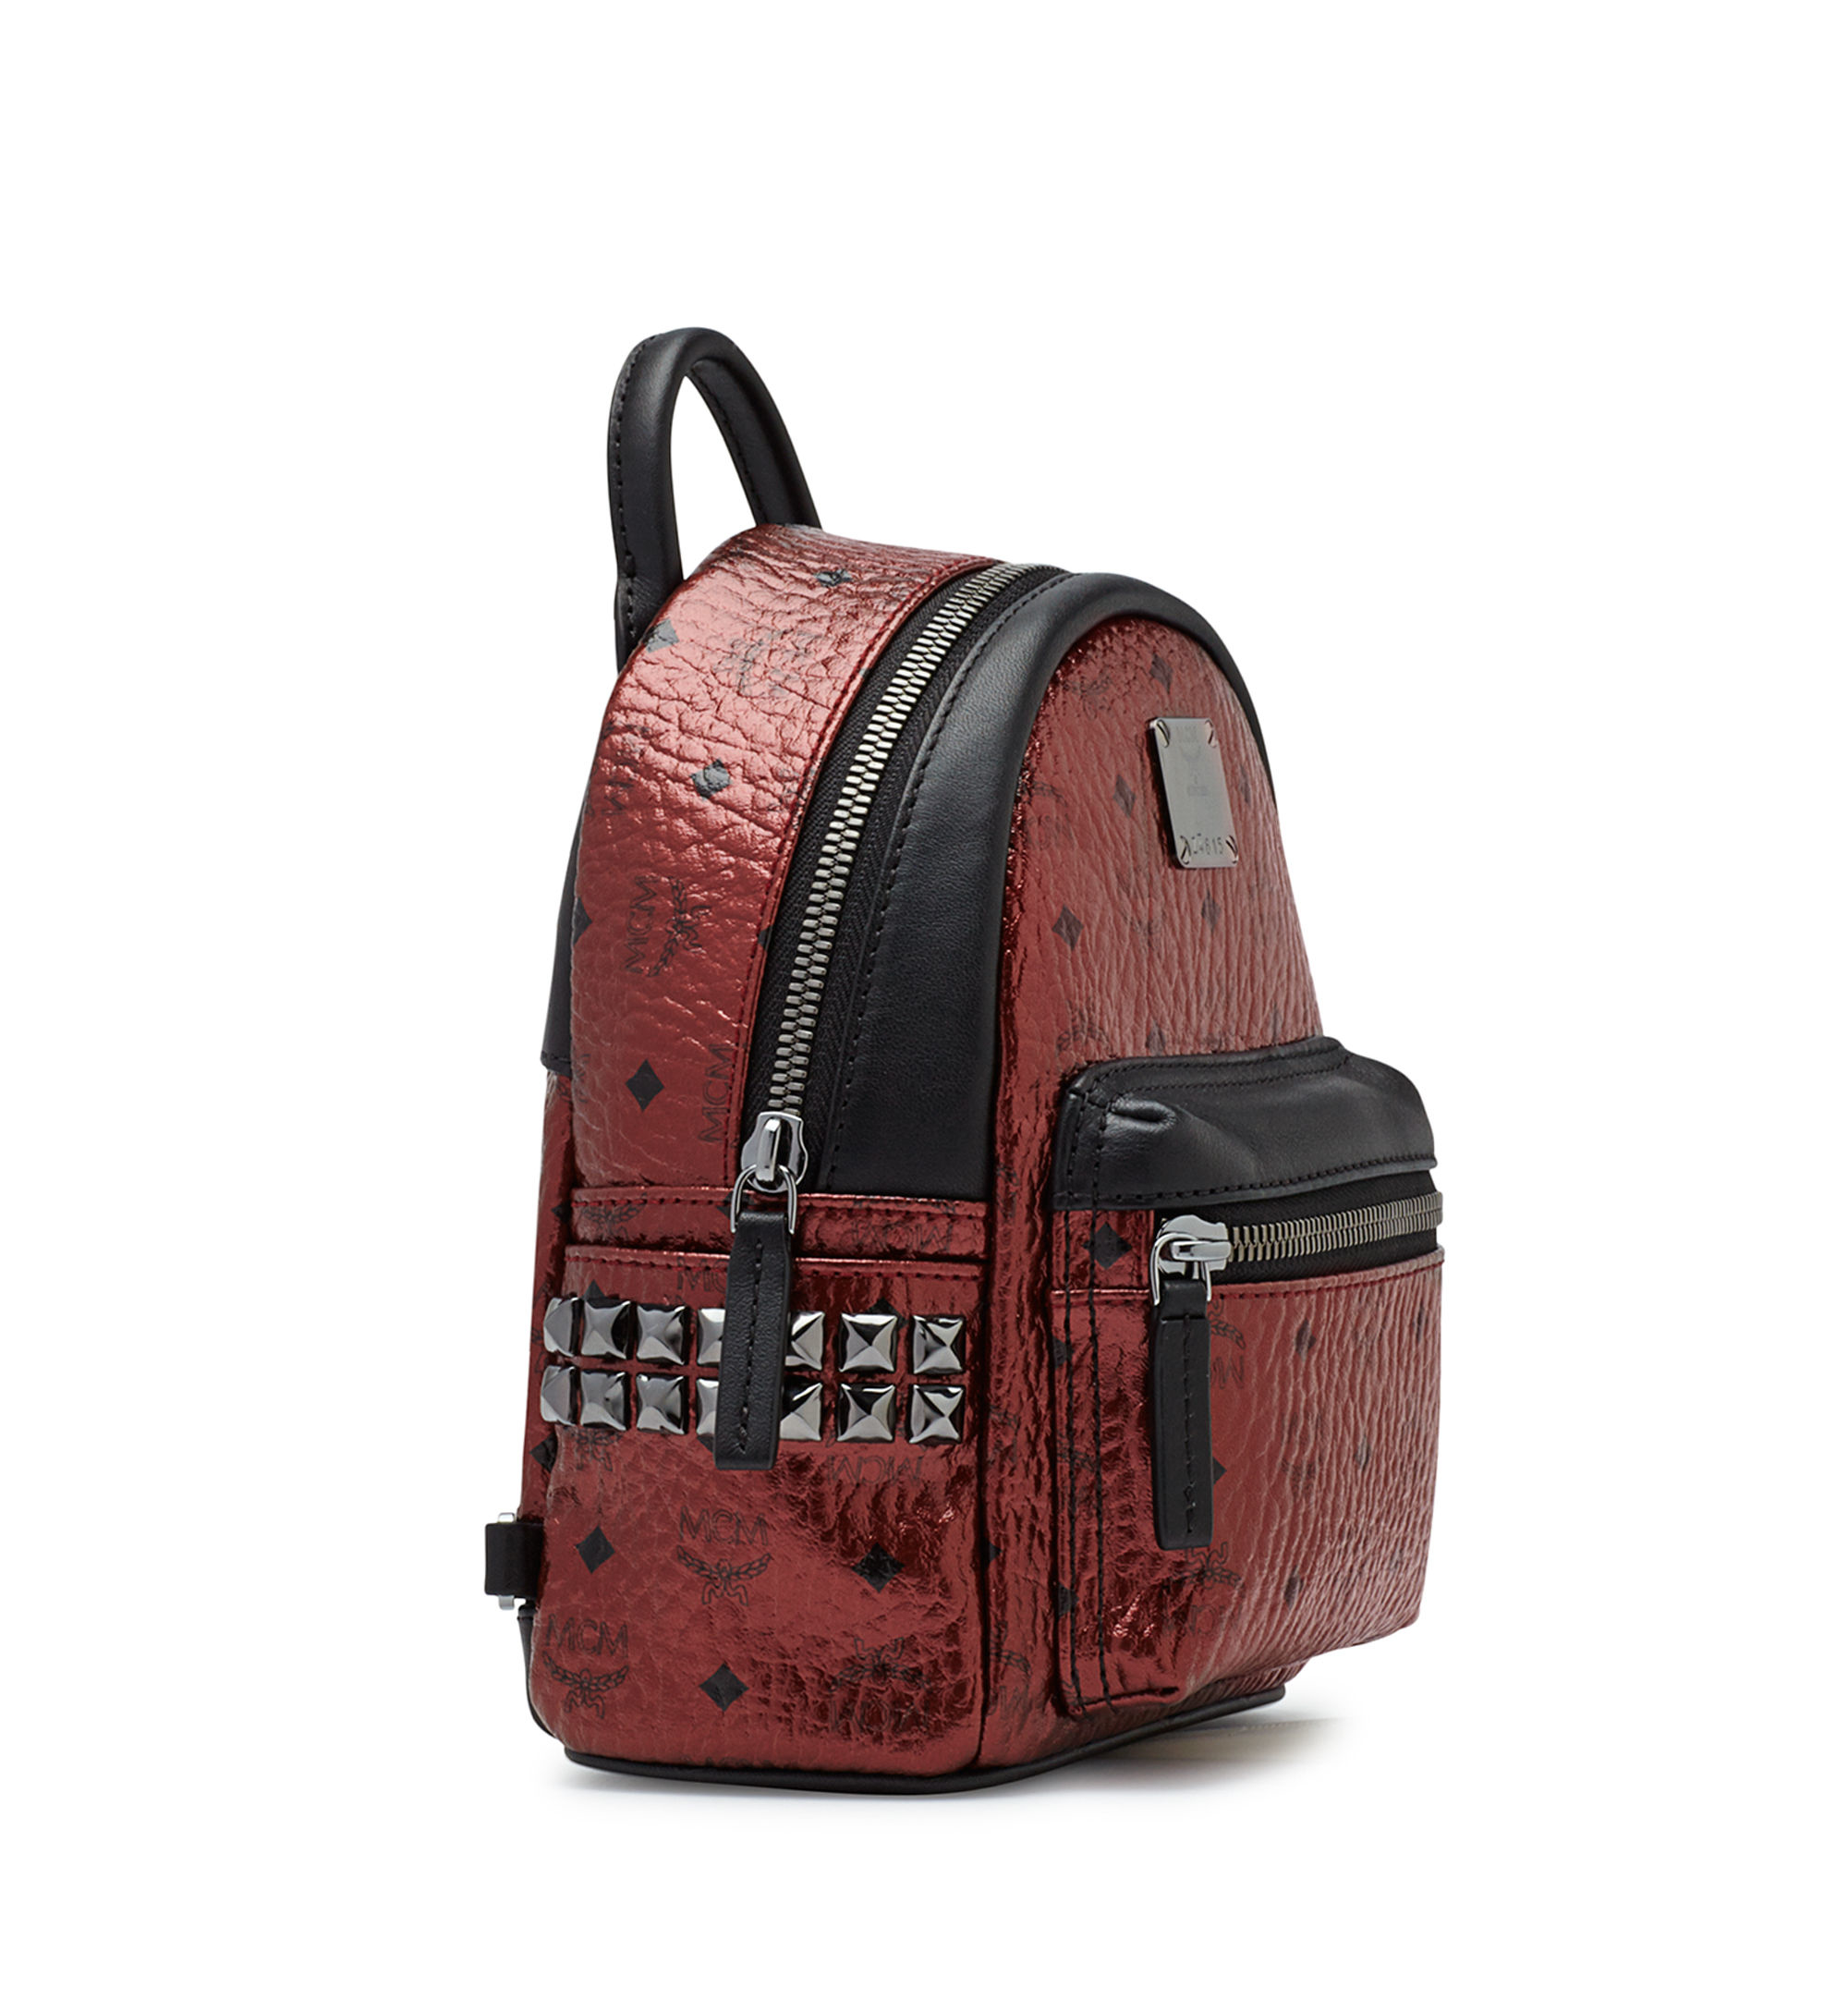 Lyst - Mcm Small Stark Backpack in Red